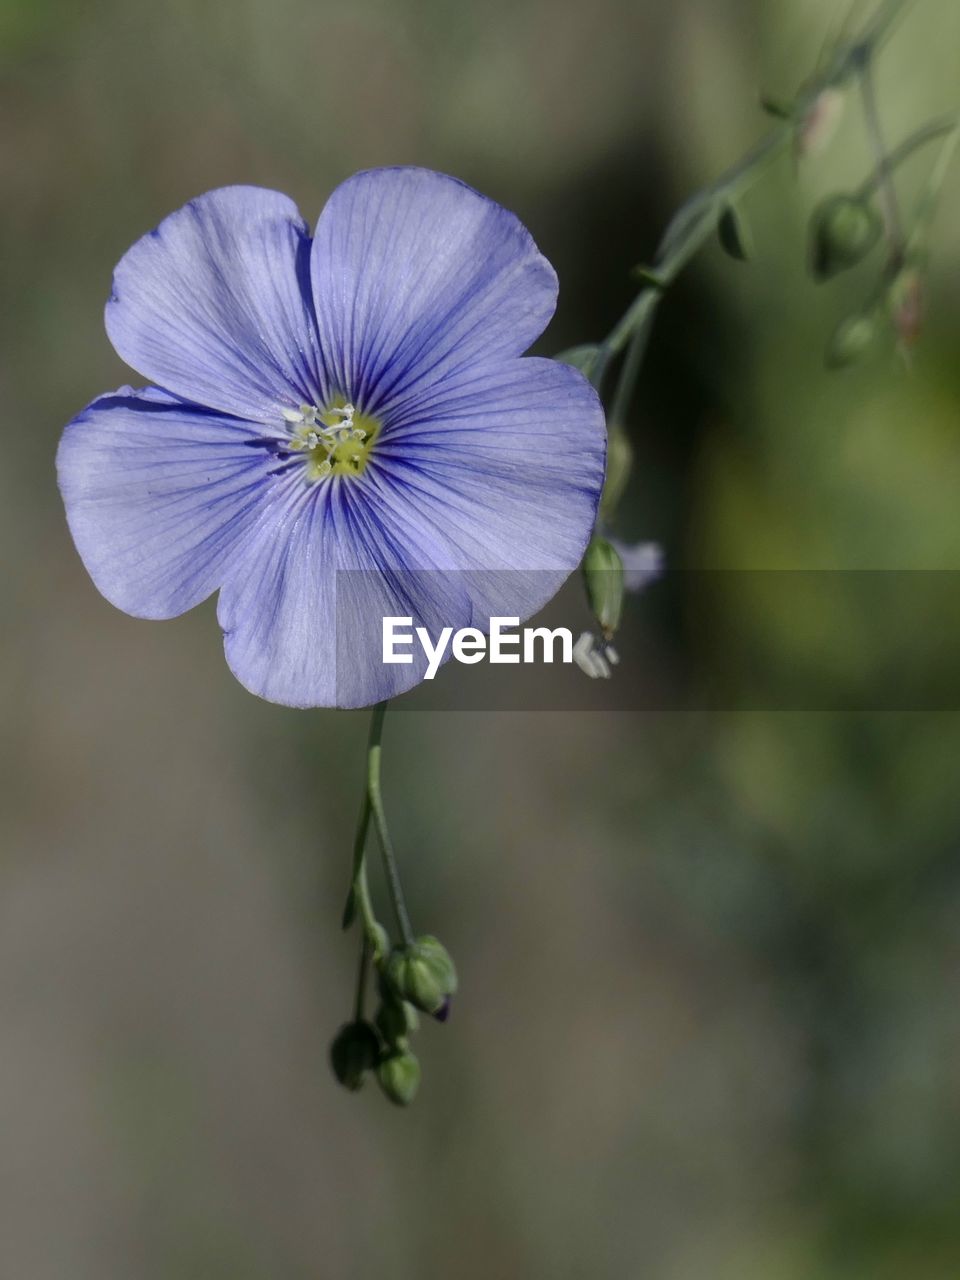 flower, flowering plant, plant, freshness, beauty in nature, close-up, fragility, purple, flower head, inflorescence, petal, growth, nature, macro photography, focus on foreground, plant stem, wildflower, no people, botany, outdoors, springtime, blossom, blue, green, day, selective focus, pollen